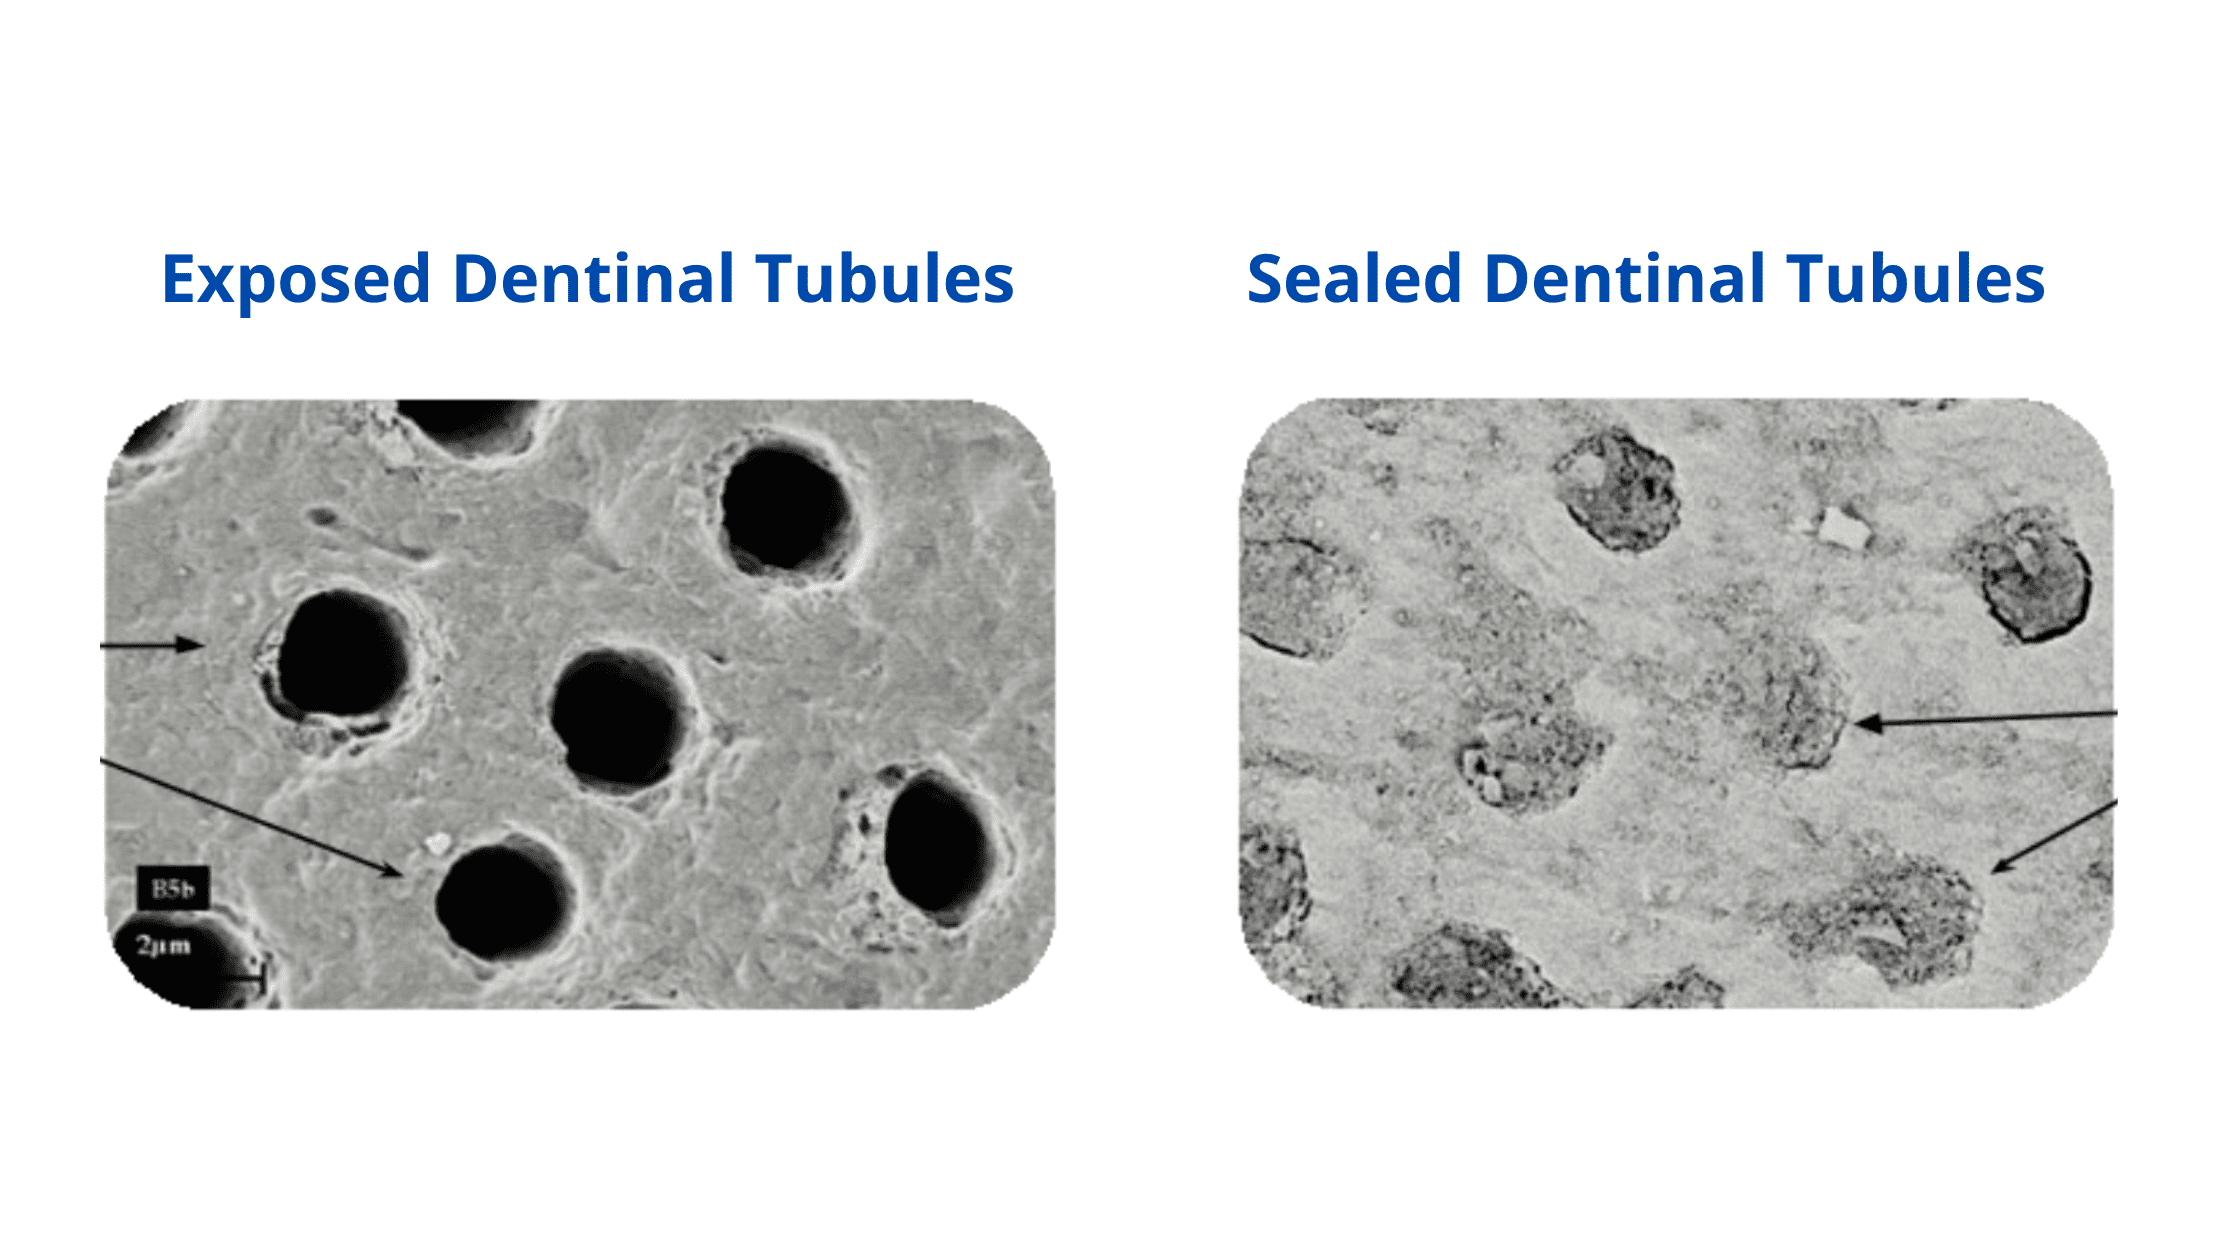 Dentinal tubules sealed after application of a remineralizing agent